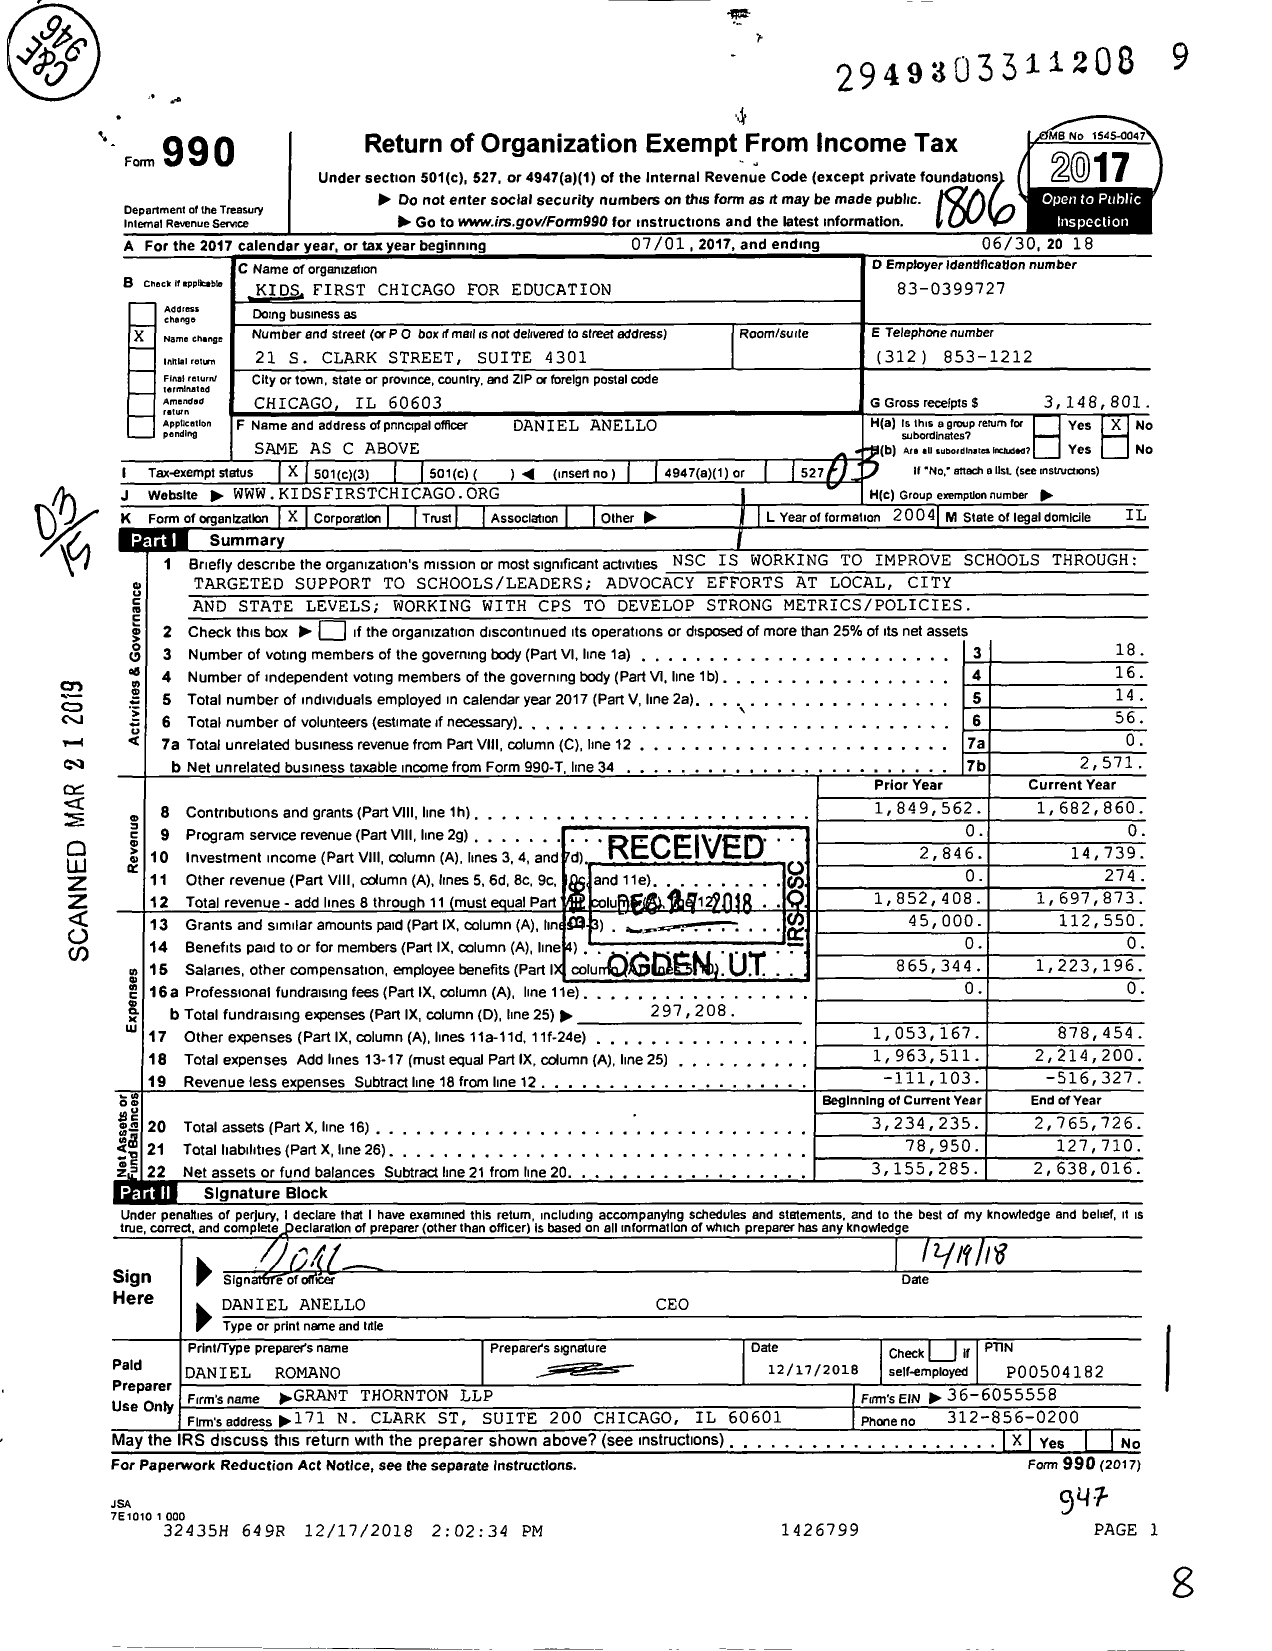 Image of first page of 2017 Form 990 for Kids First Chicago for Education (NSC)